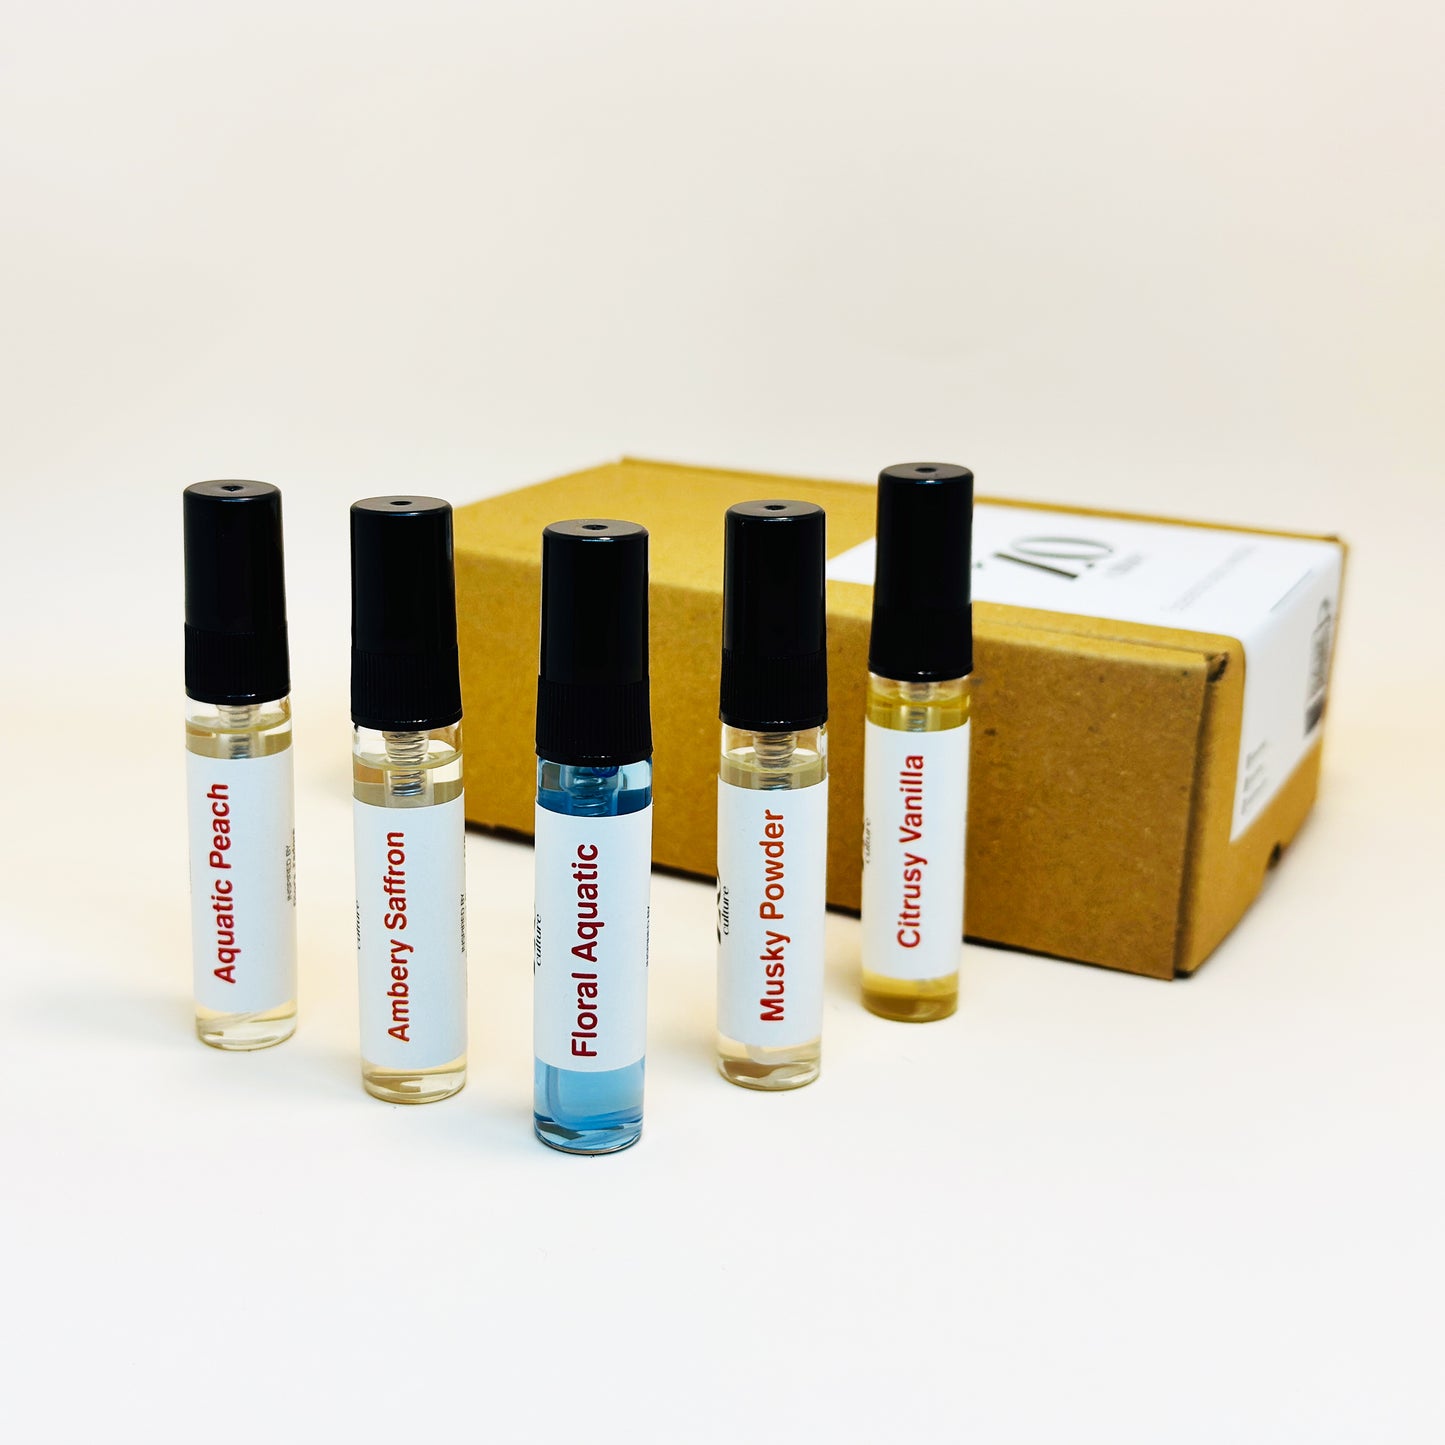 Testers Signature Women Scent Sampler Collection 2 ZoCulture